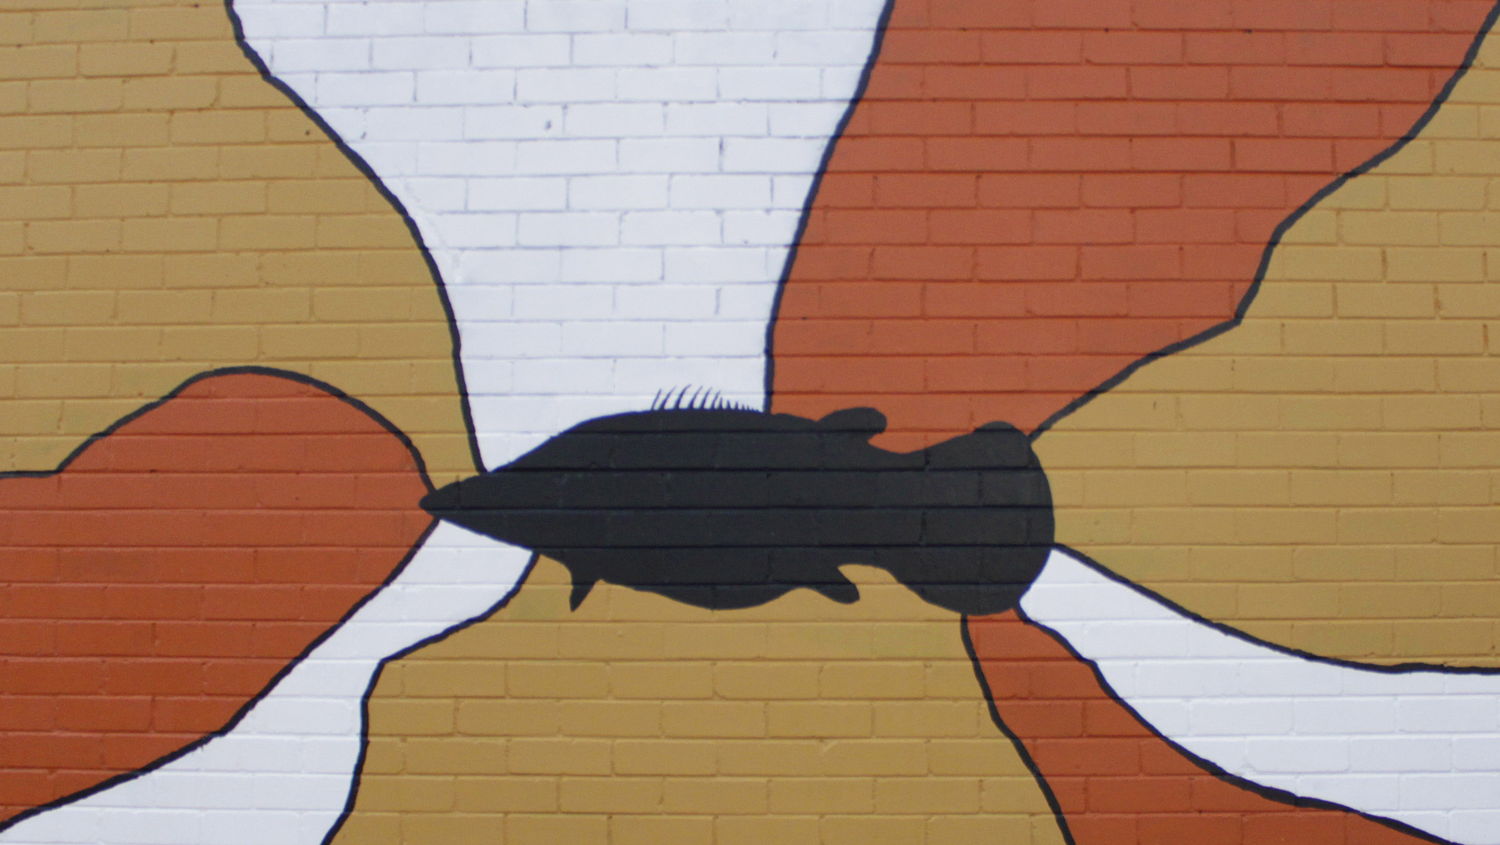 One of the Two Way Project murals in Canberra. Image: Adam Spence, ANU.